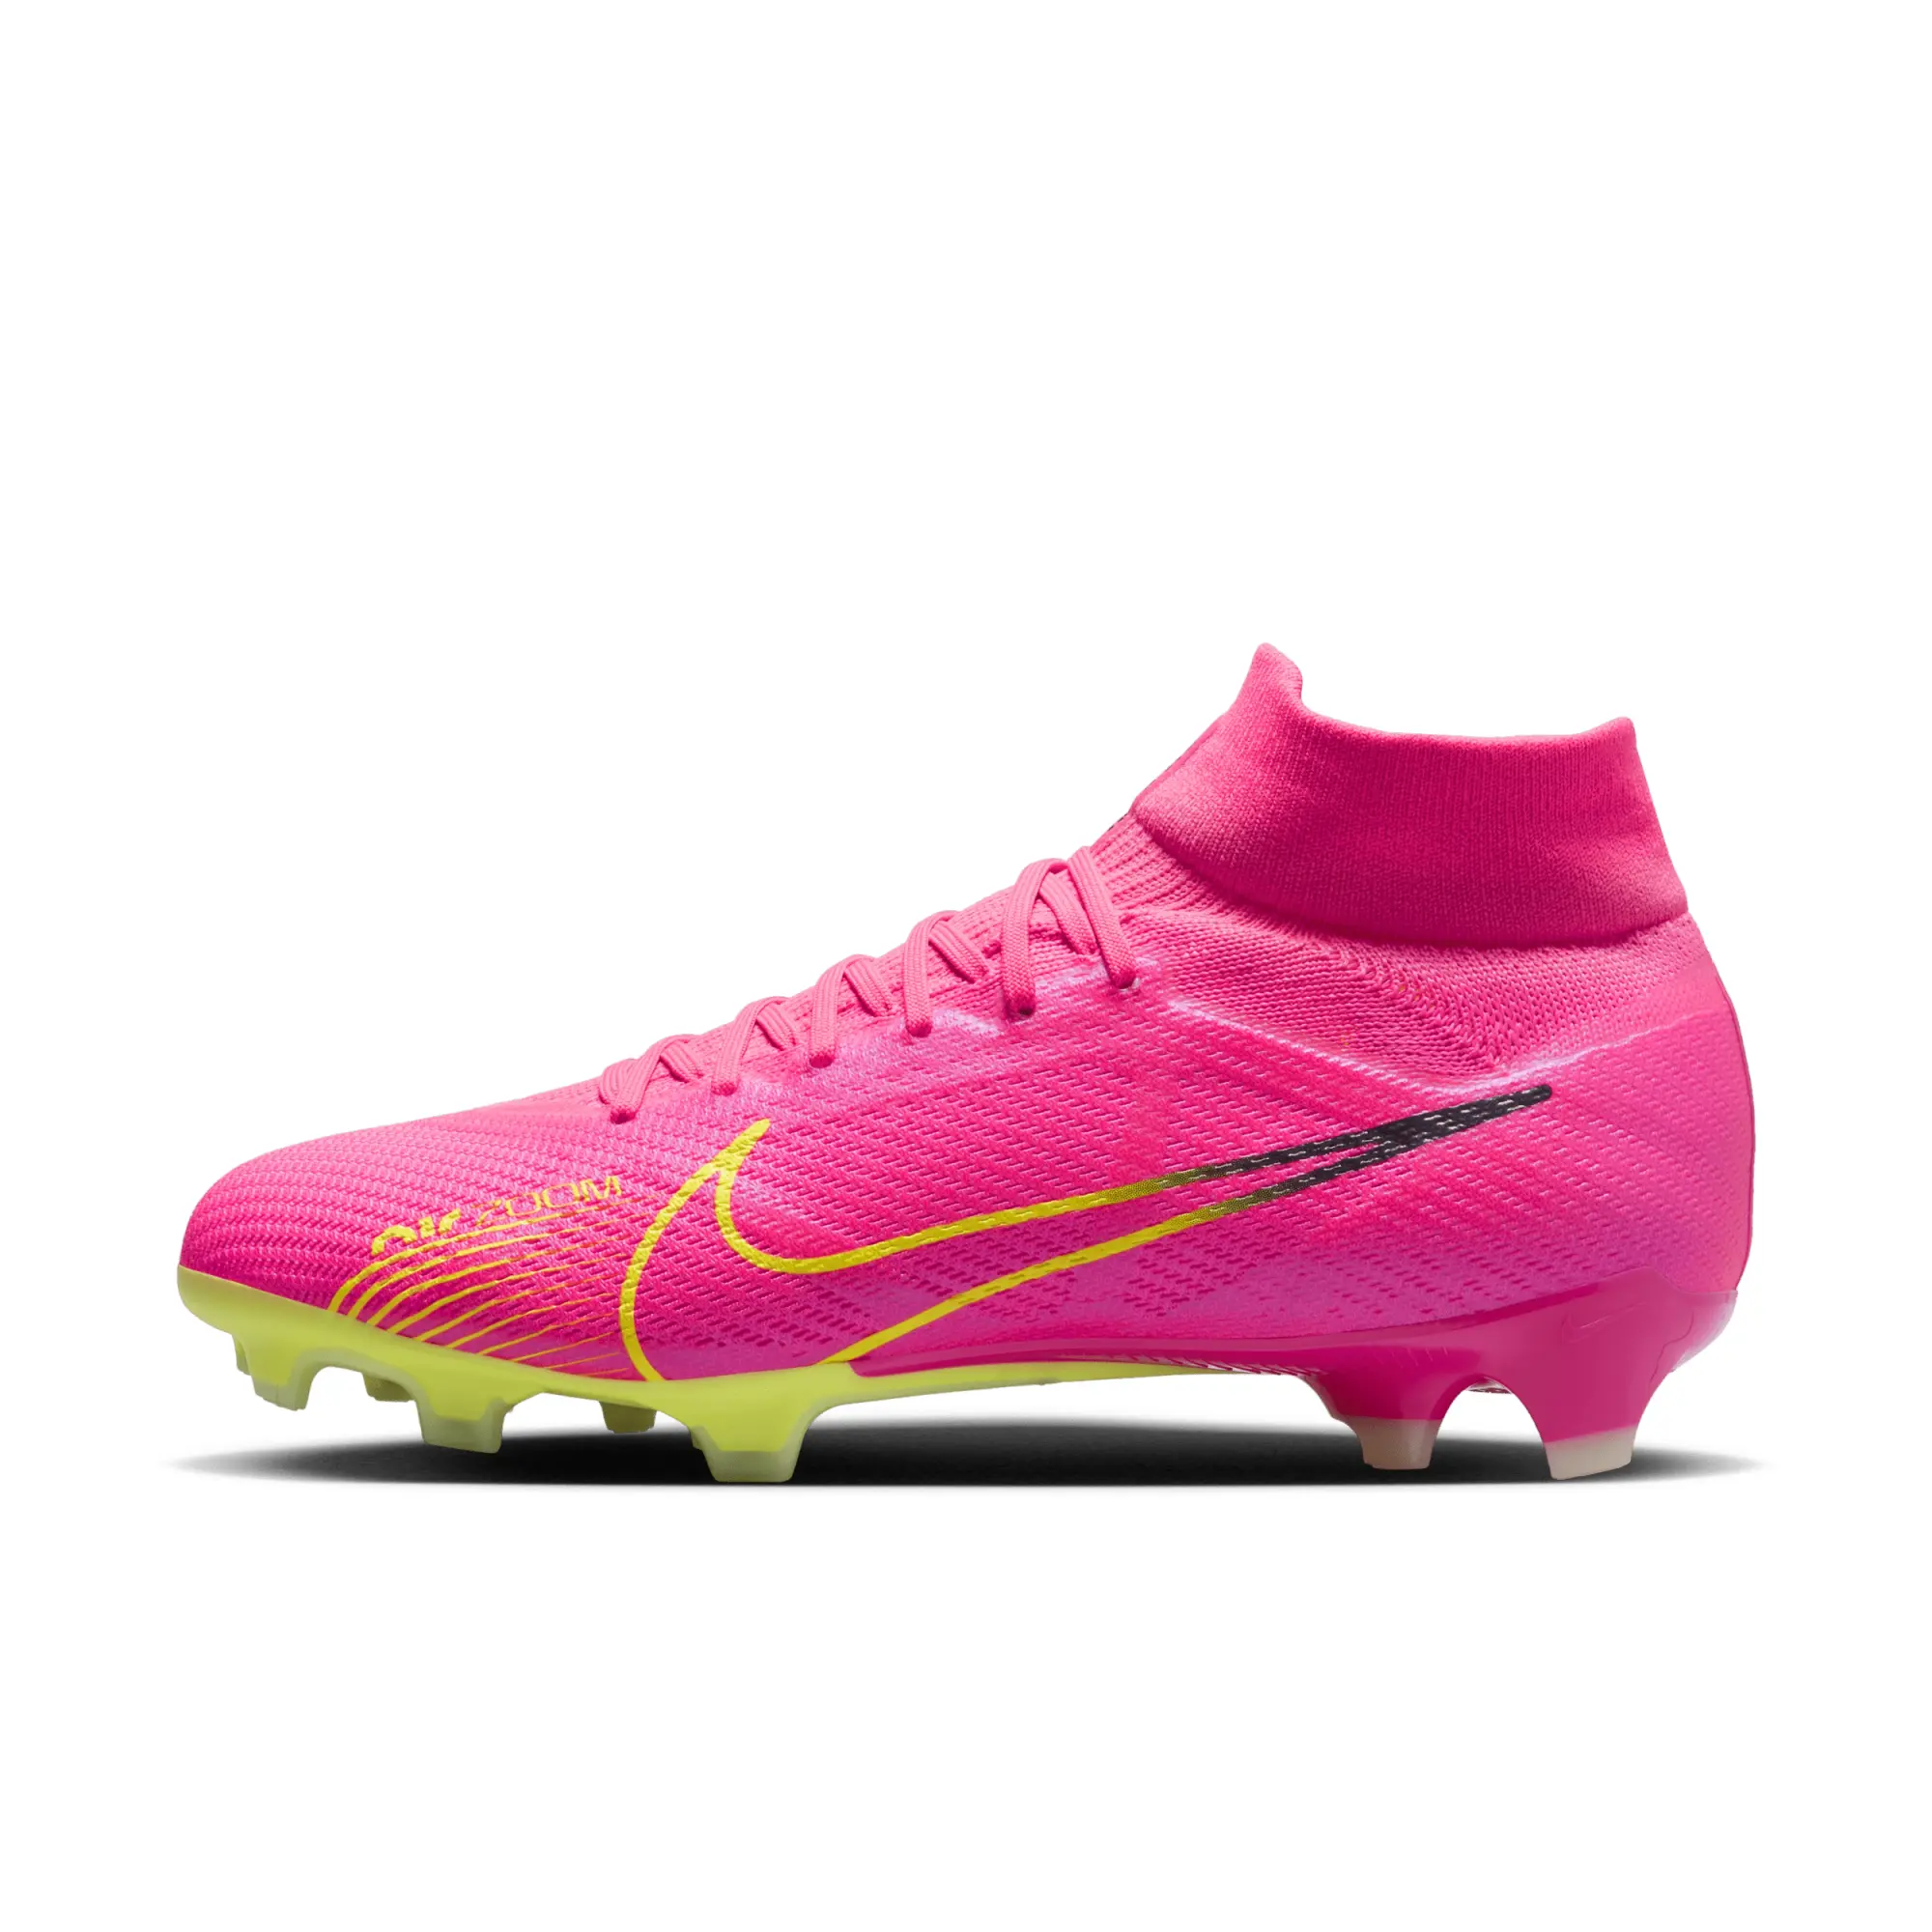 Nike Mercurial Superfly 9 Pro Firm-Ground Football Boot - Pink